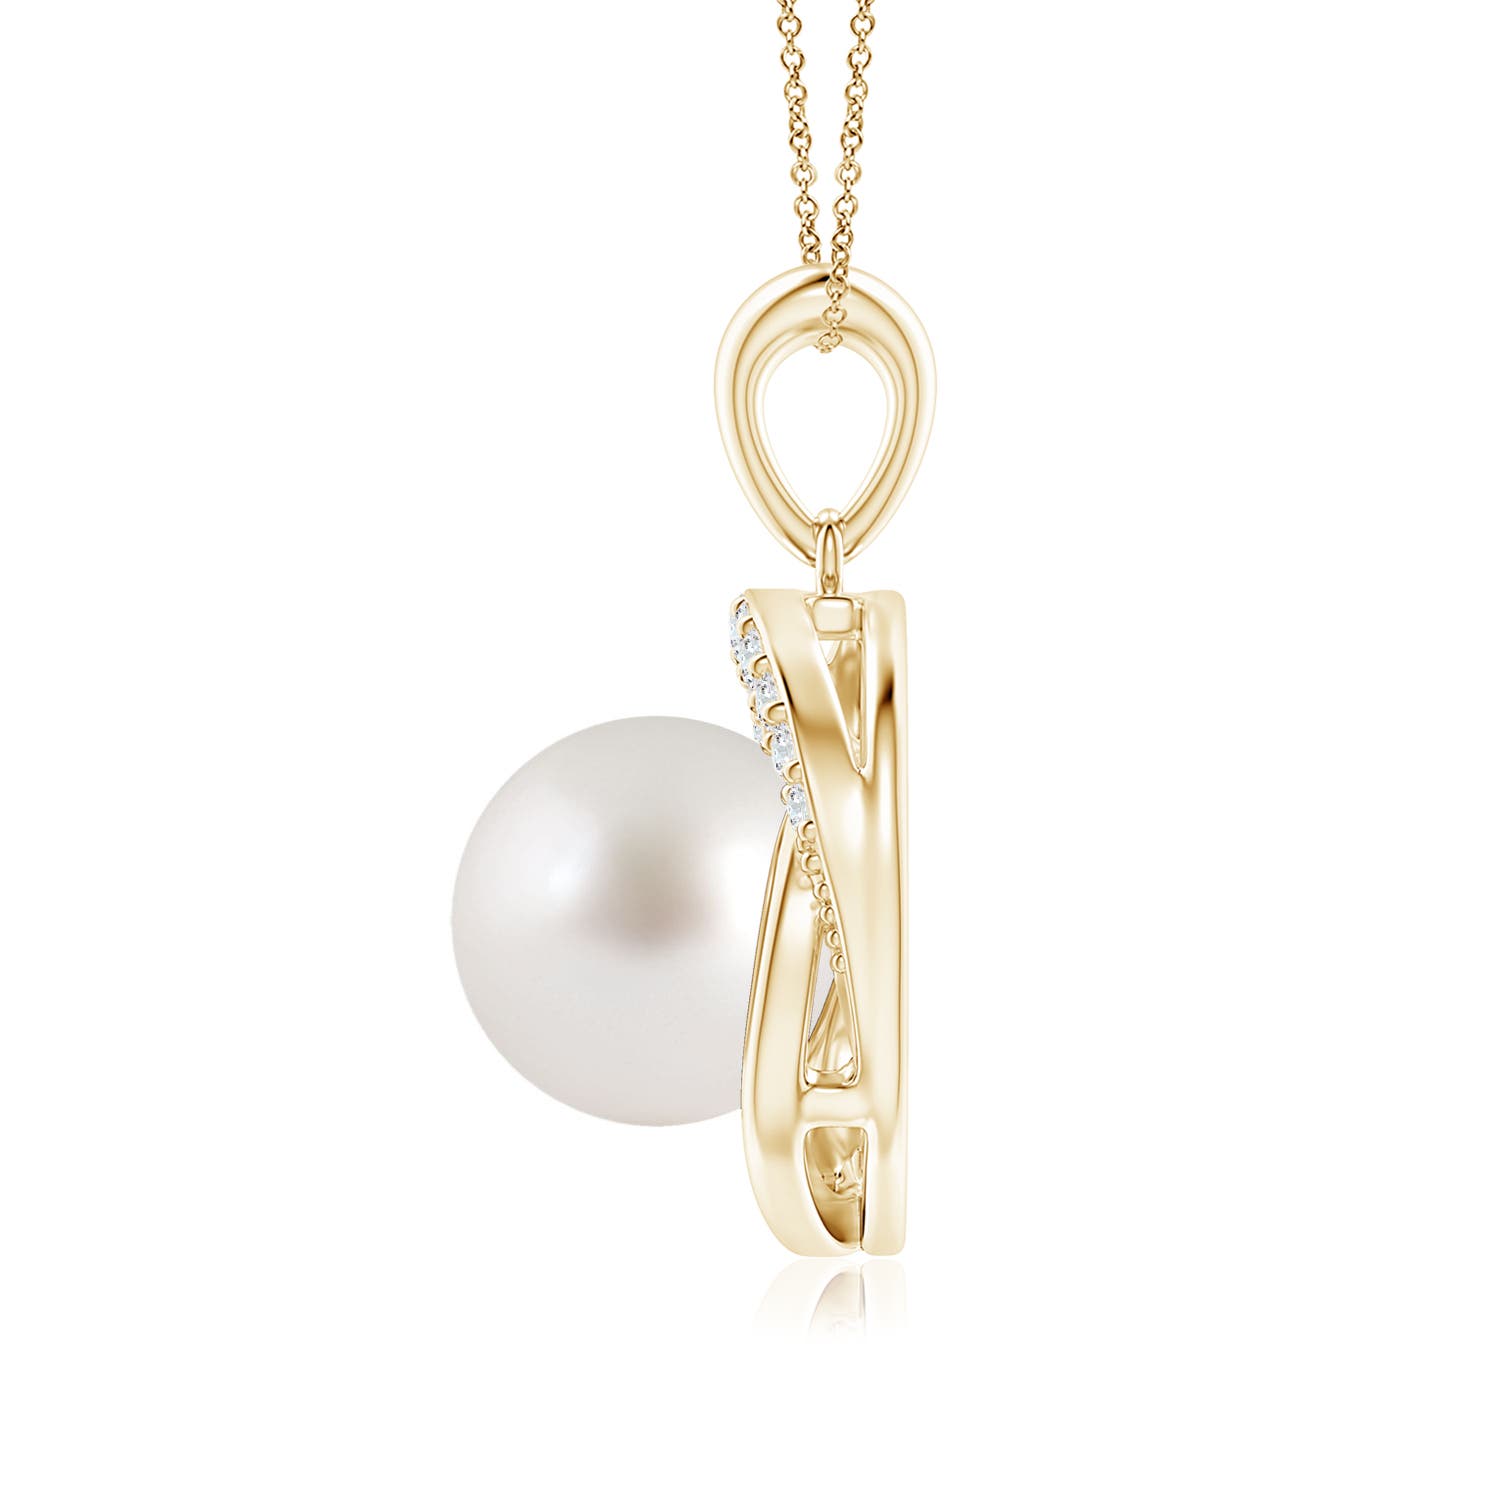 AAA - South Sea Cultured Pearl / 5.36 CT / 14 KT Yellow Gold